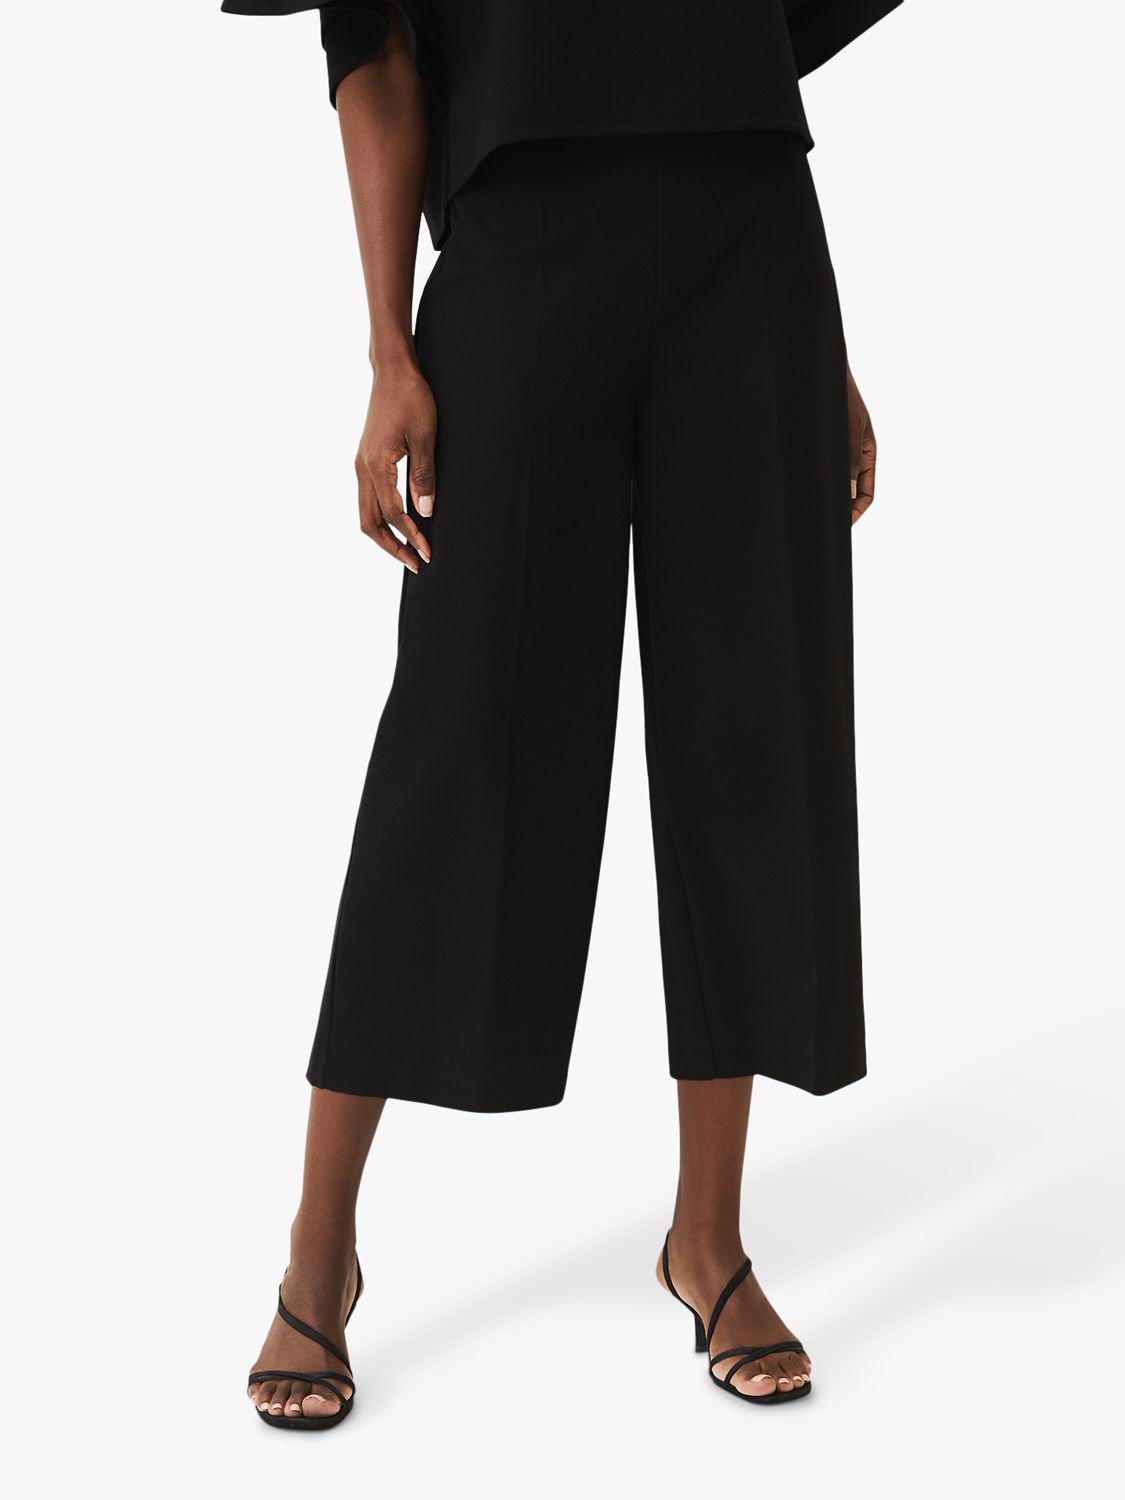 Phase Eight Halle Culottes, Black, 8